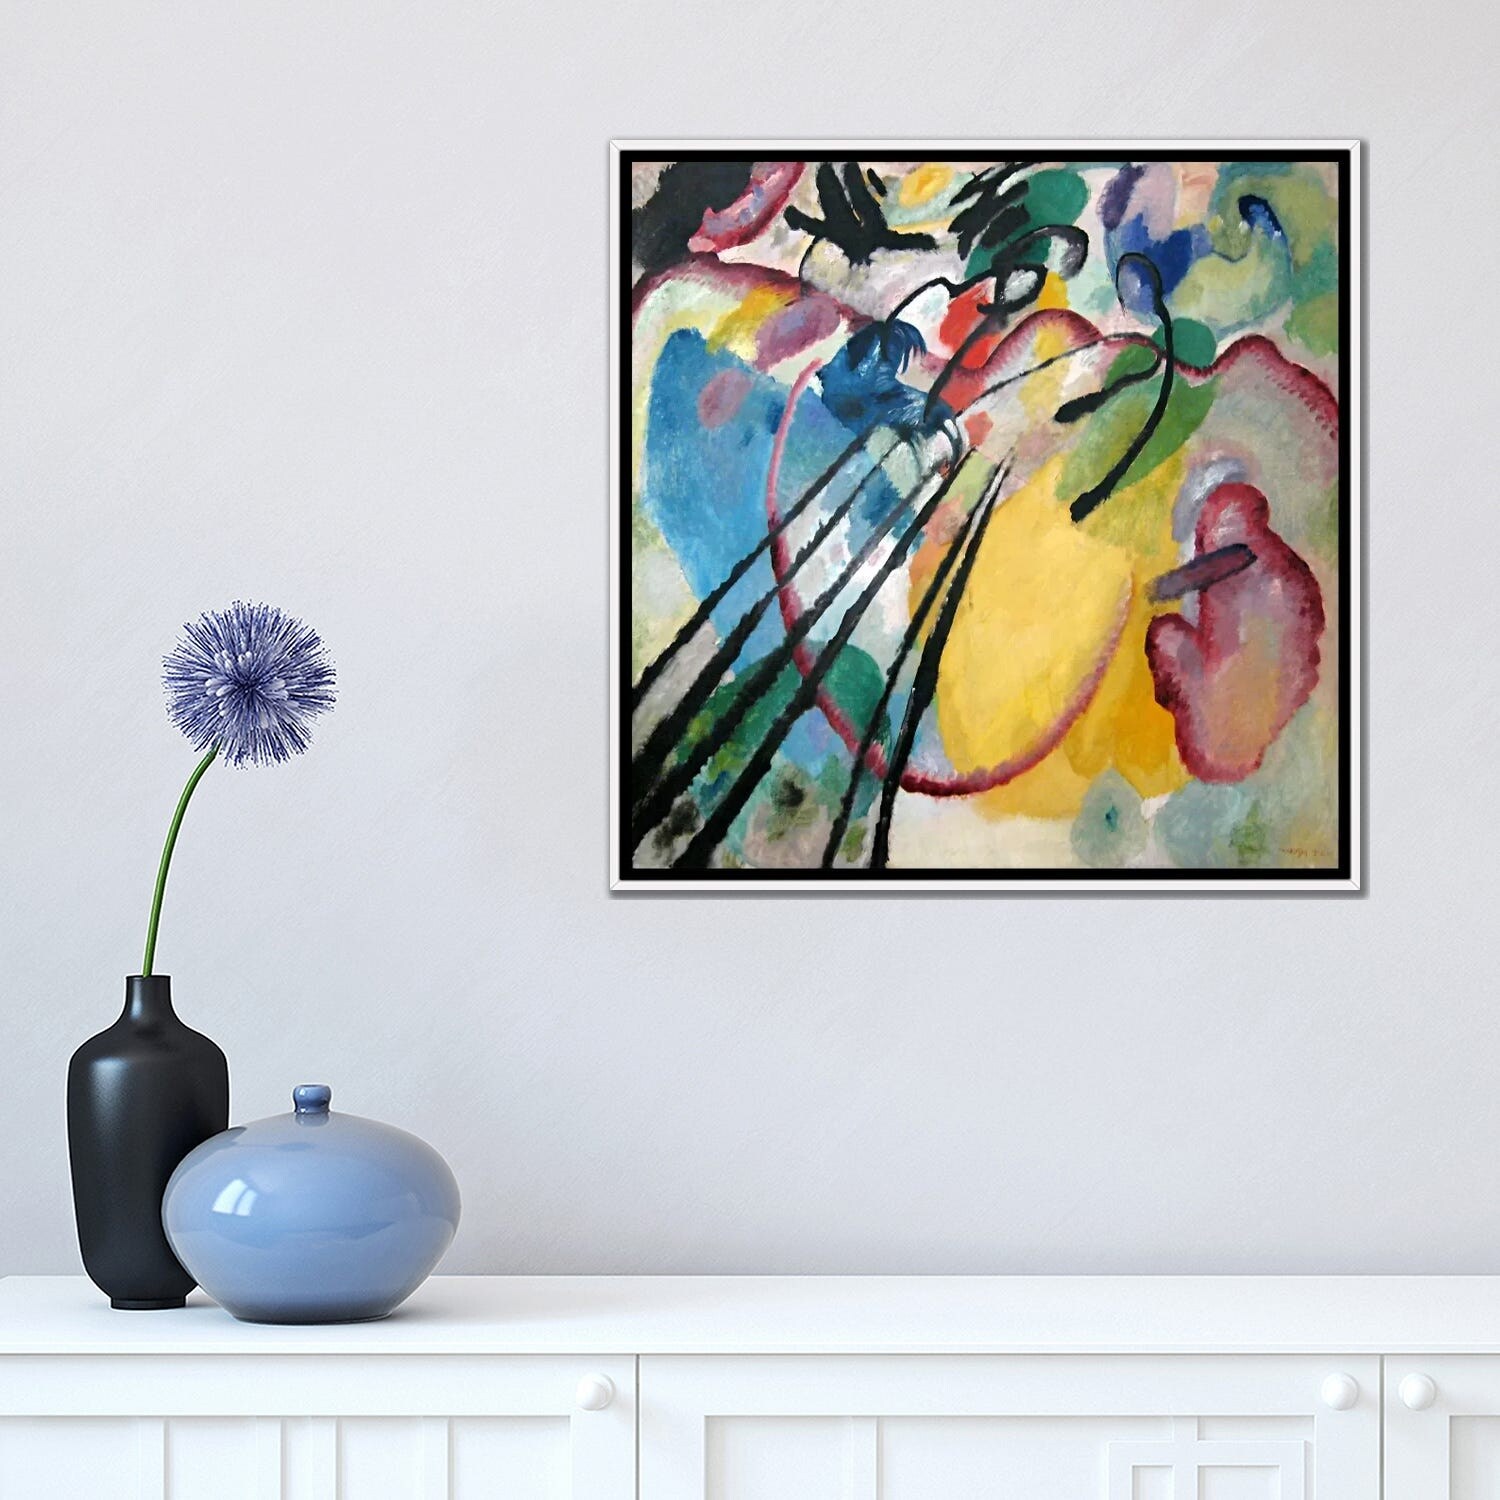 iCanvas "Improvisation 26 (Rowing)" by Wassily Kandinsky Framed Canvas Print